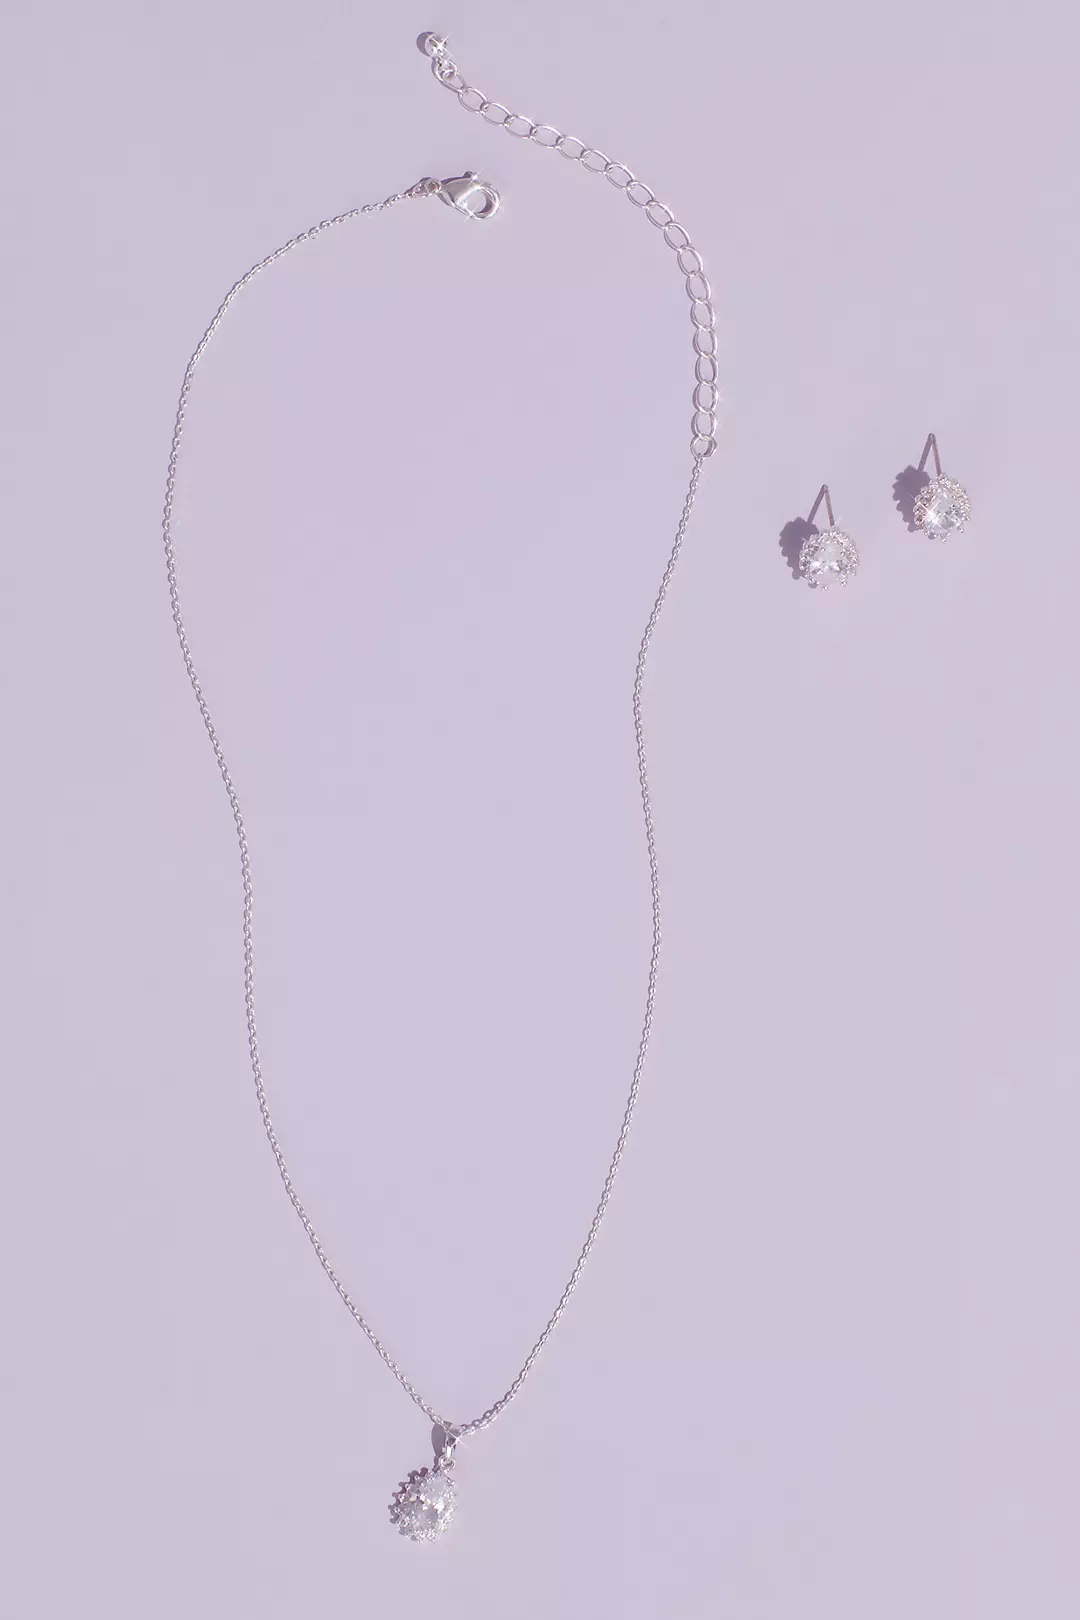 Almond Cubic Zirconia Necklace and Earring Set Image